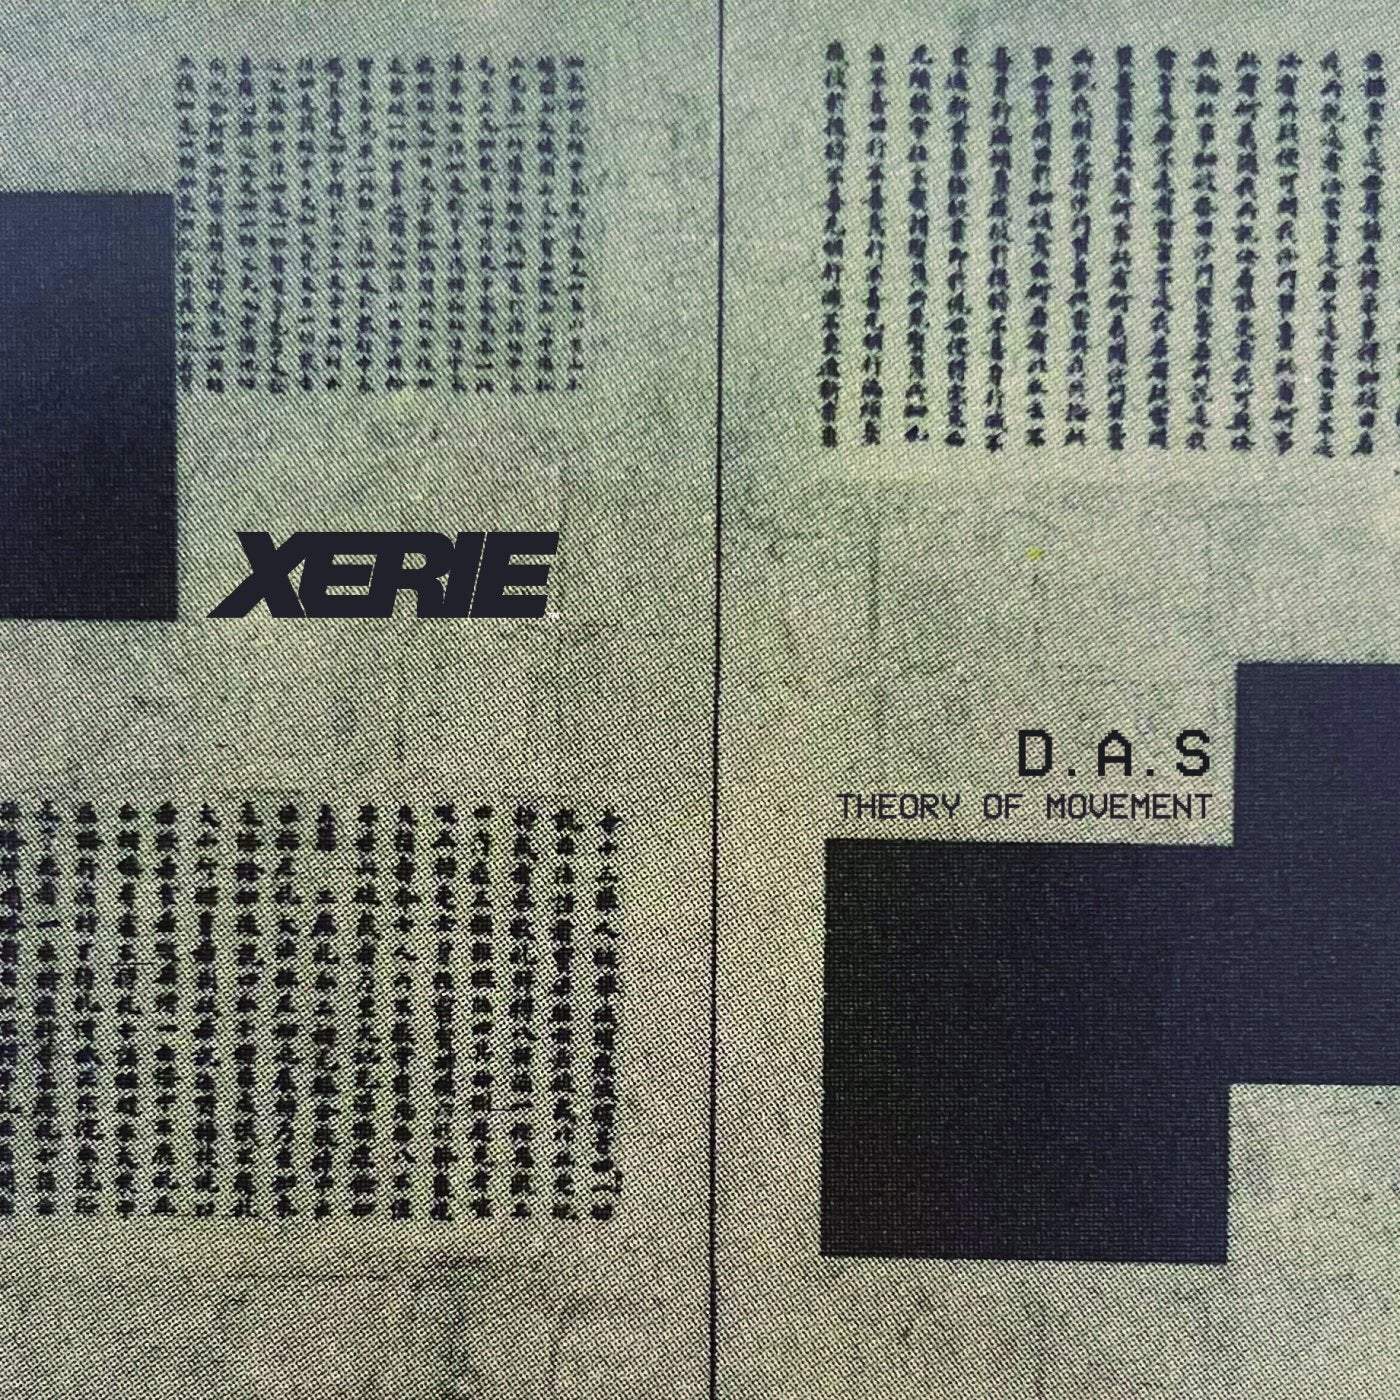 Download D.A.S - Theory of Movement on Electrobuzz